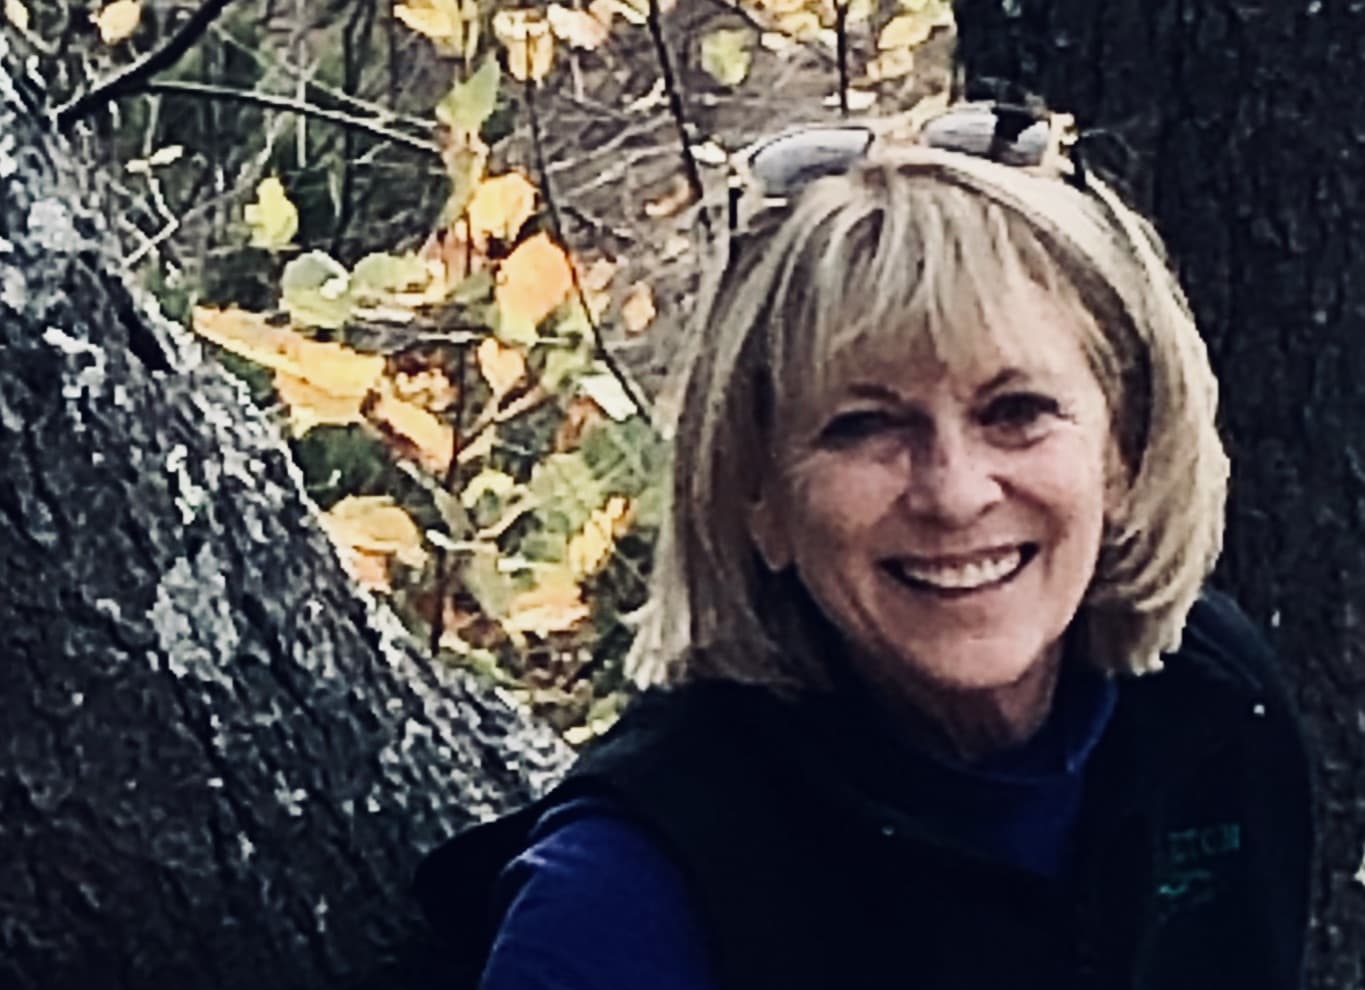 Martha Coulter smiles at the camera with trees and foliage in the background.